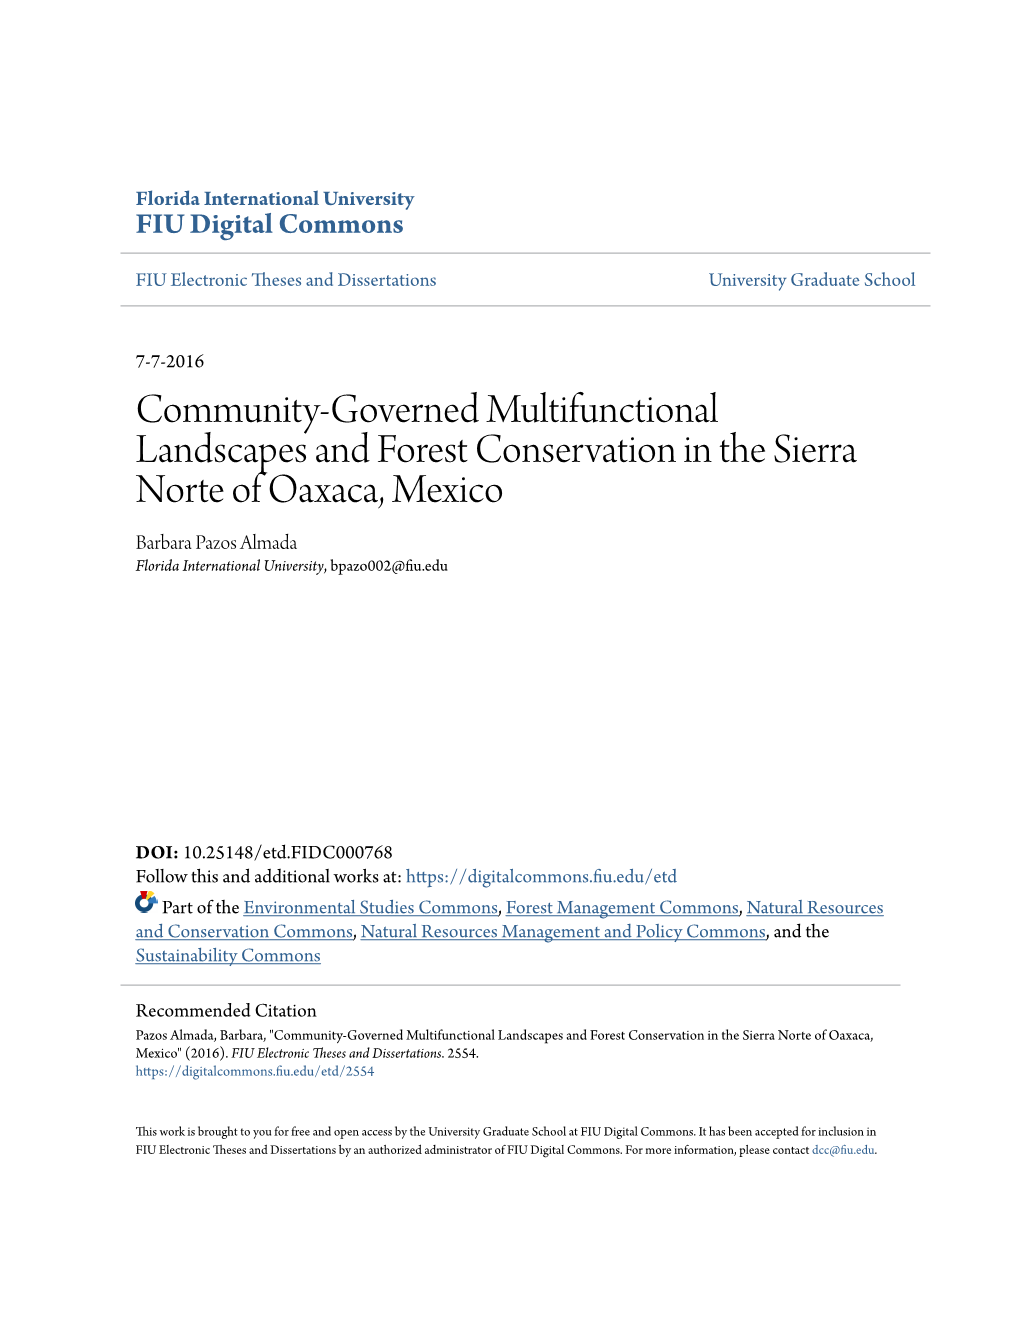 Community-Governed Multifunctional Landscapes and Forest